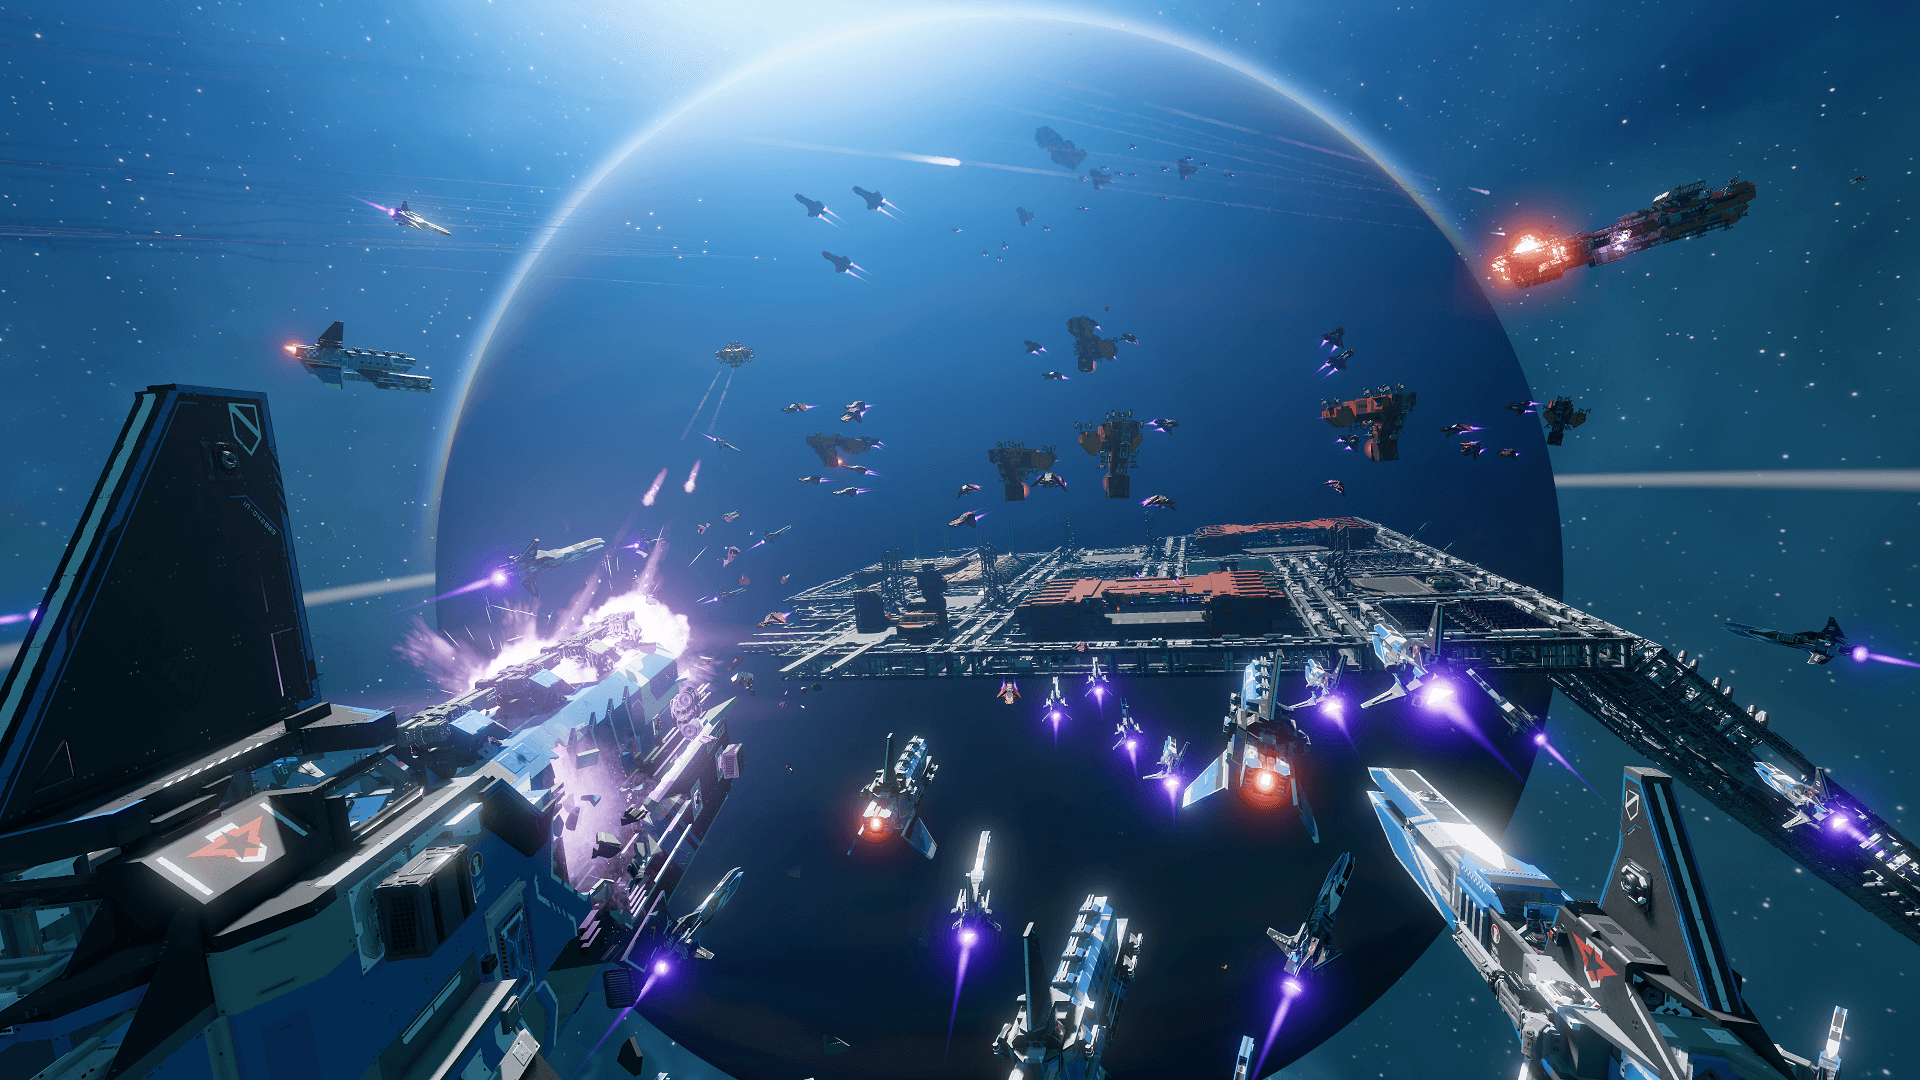 A massive battle is underway as ships fly everywhere in Starbase